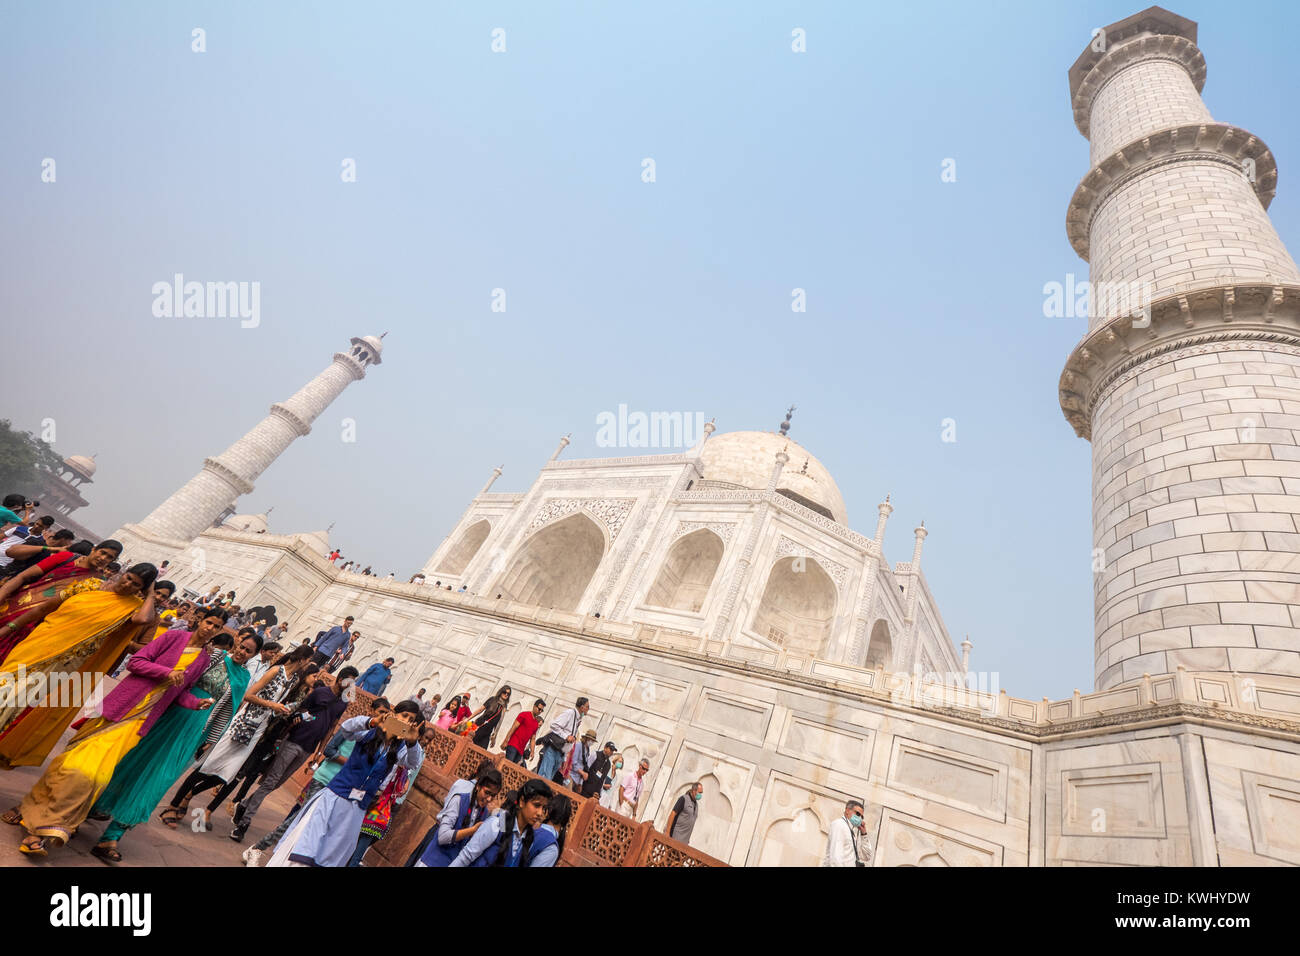 Indian visitors to The Taj Mahal, Agra, India. Built by the Mughal emperor Shah Jahan, the mausoleum houses his wife's tomb Stock Photo